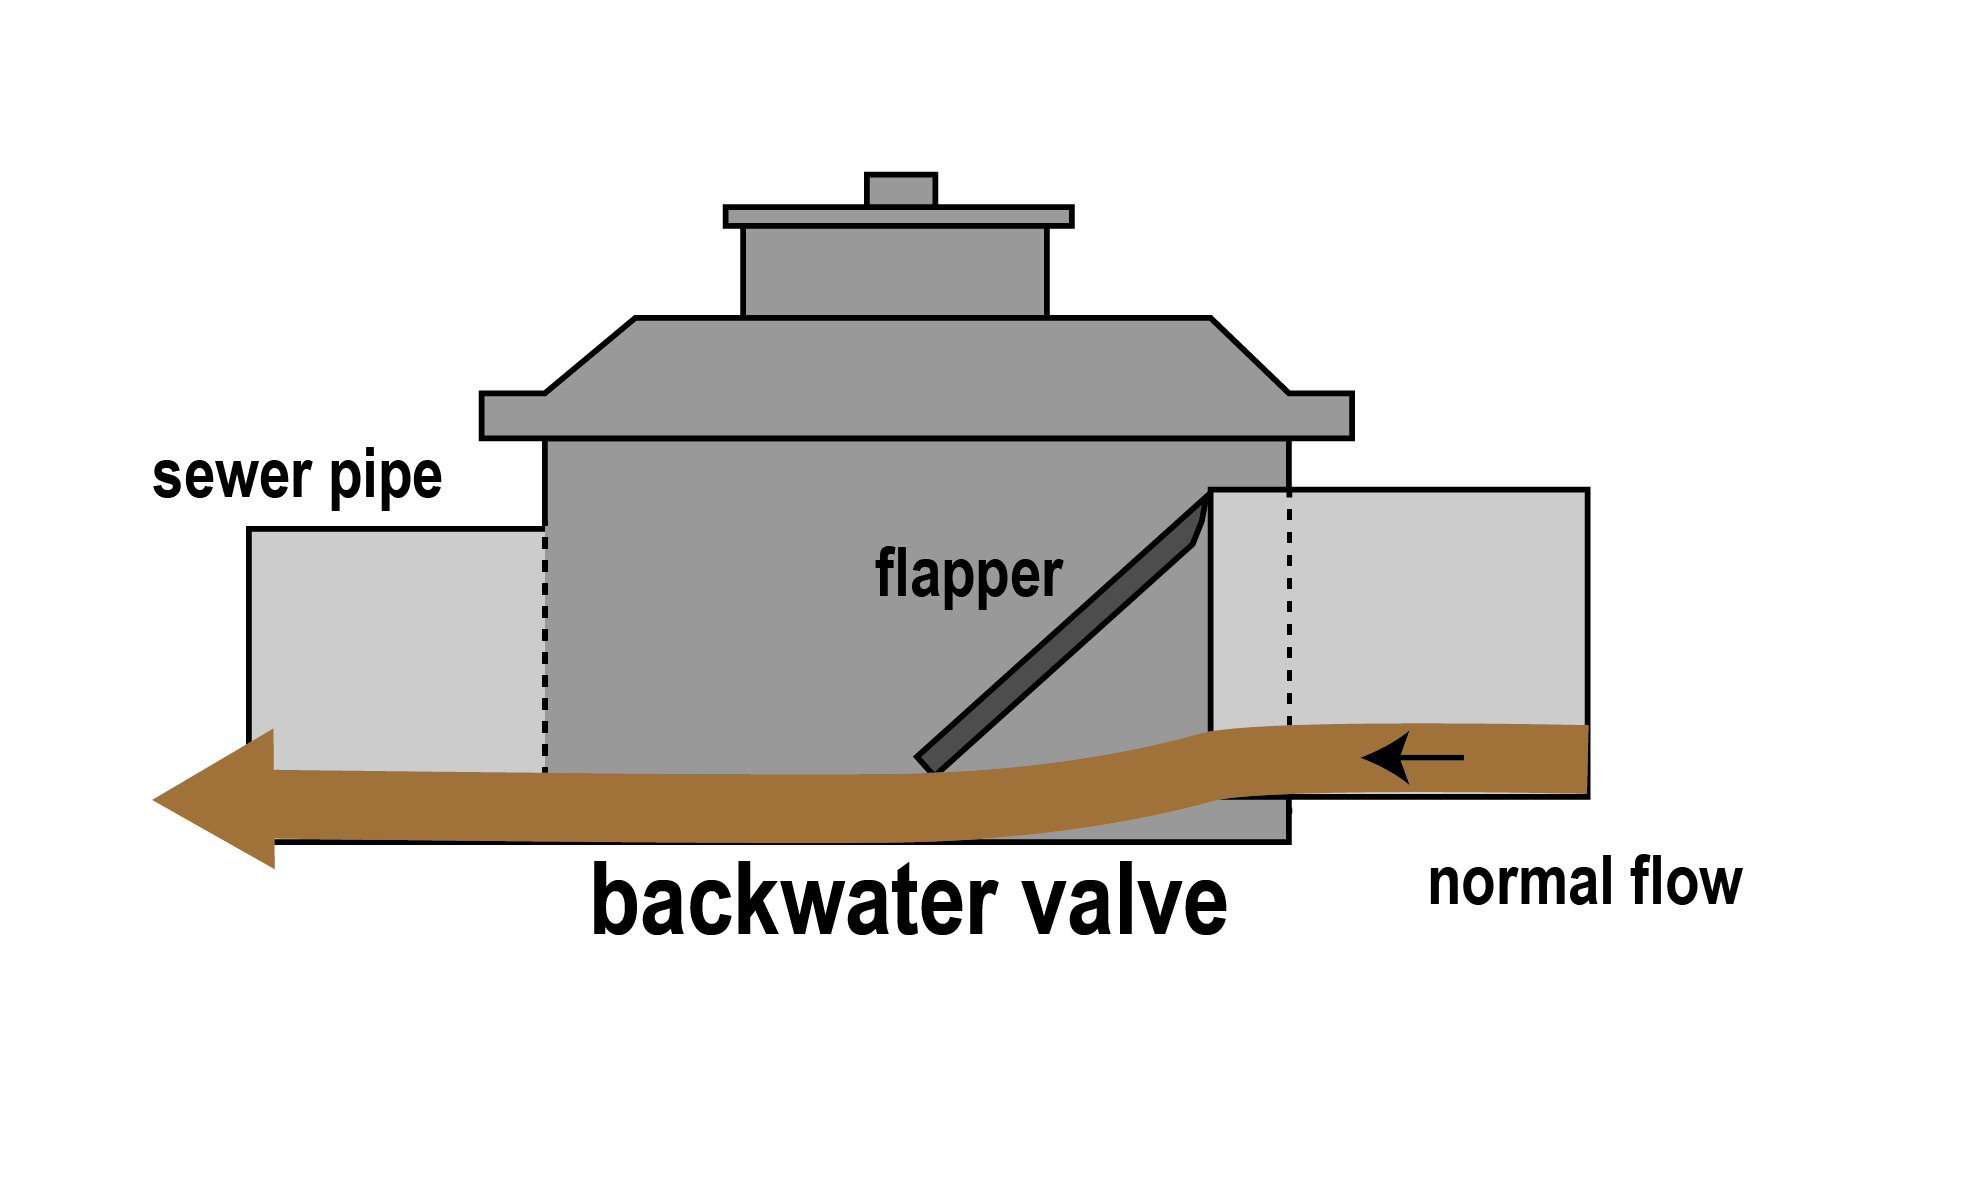 Diagram showing the open flapper when flow is normal, from home pipes to sewer